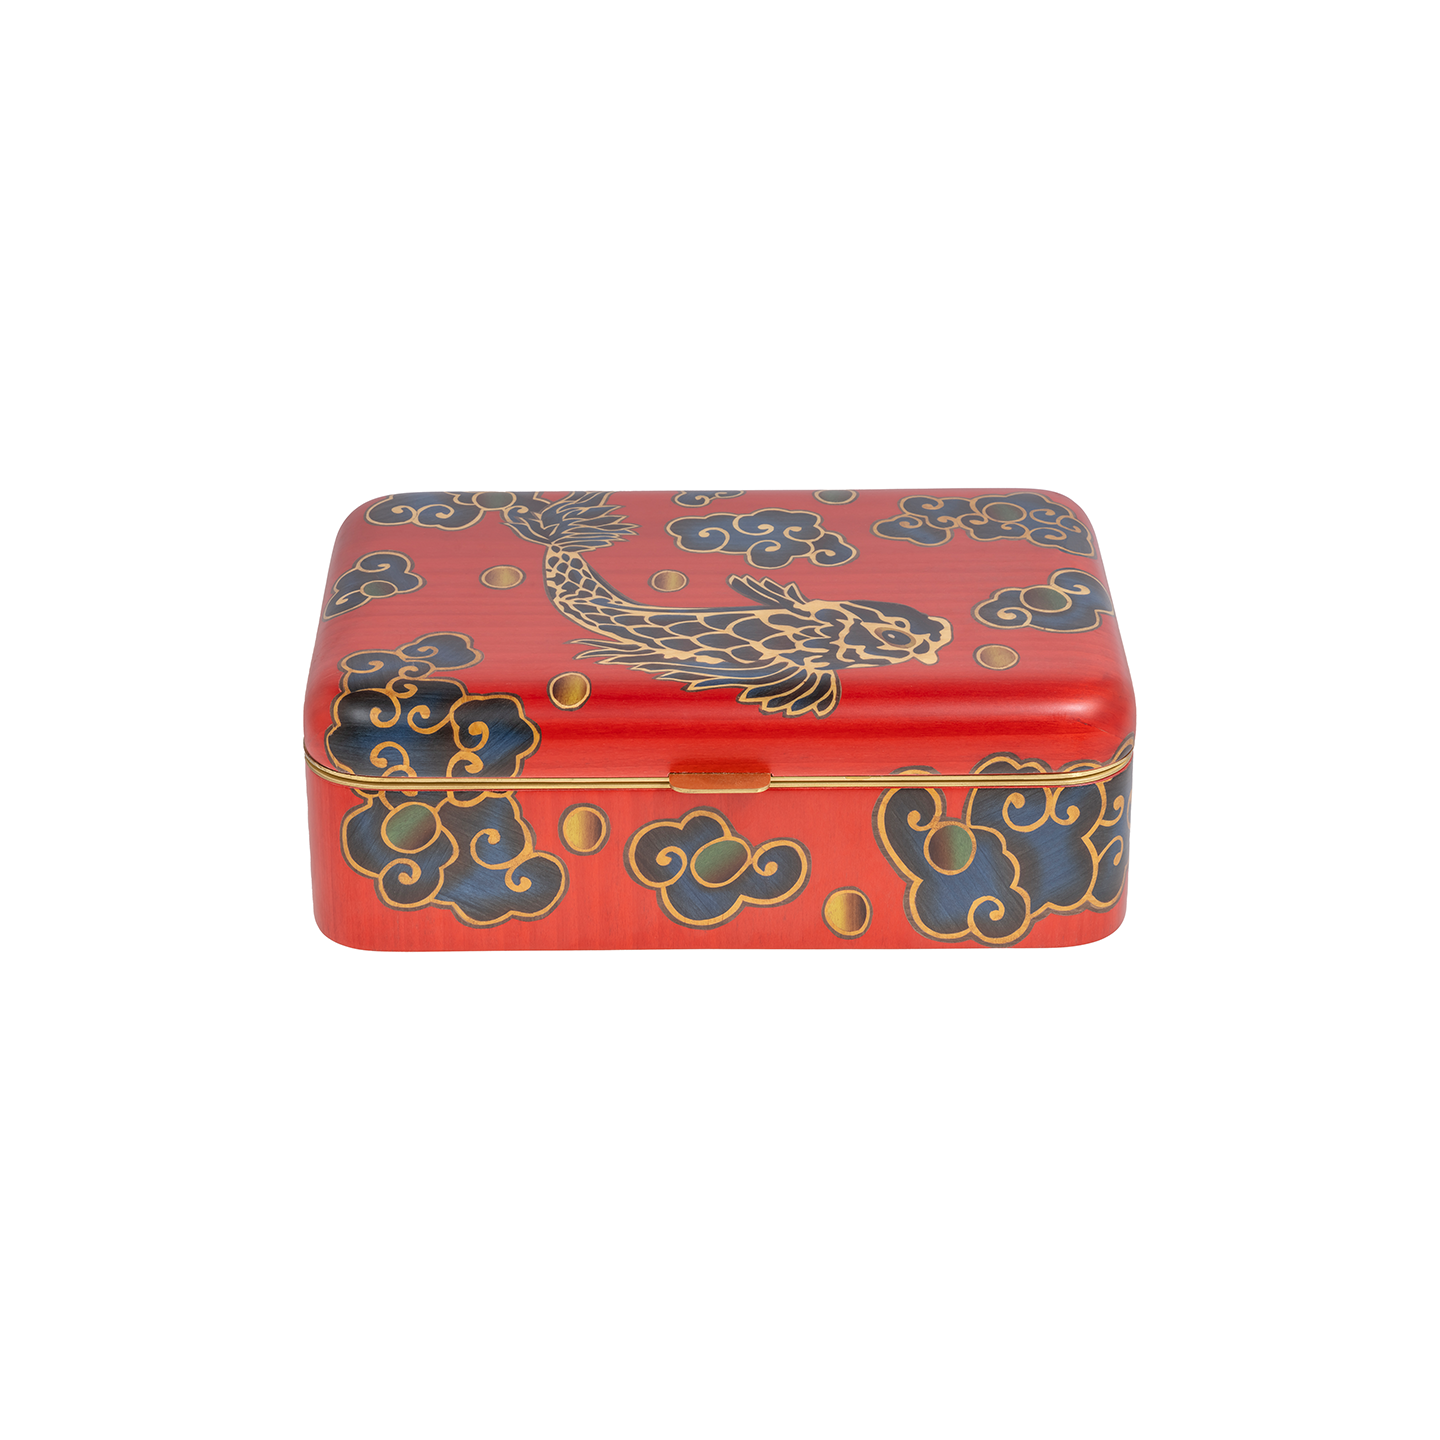 Silvia Furmanovich Marquetry Box with Blue Cloud and Carp Pattern